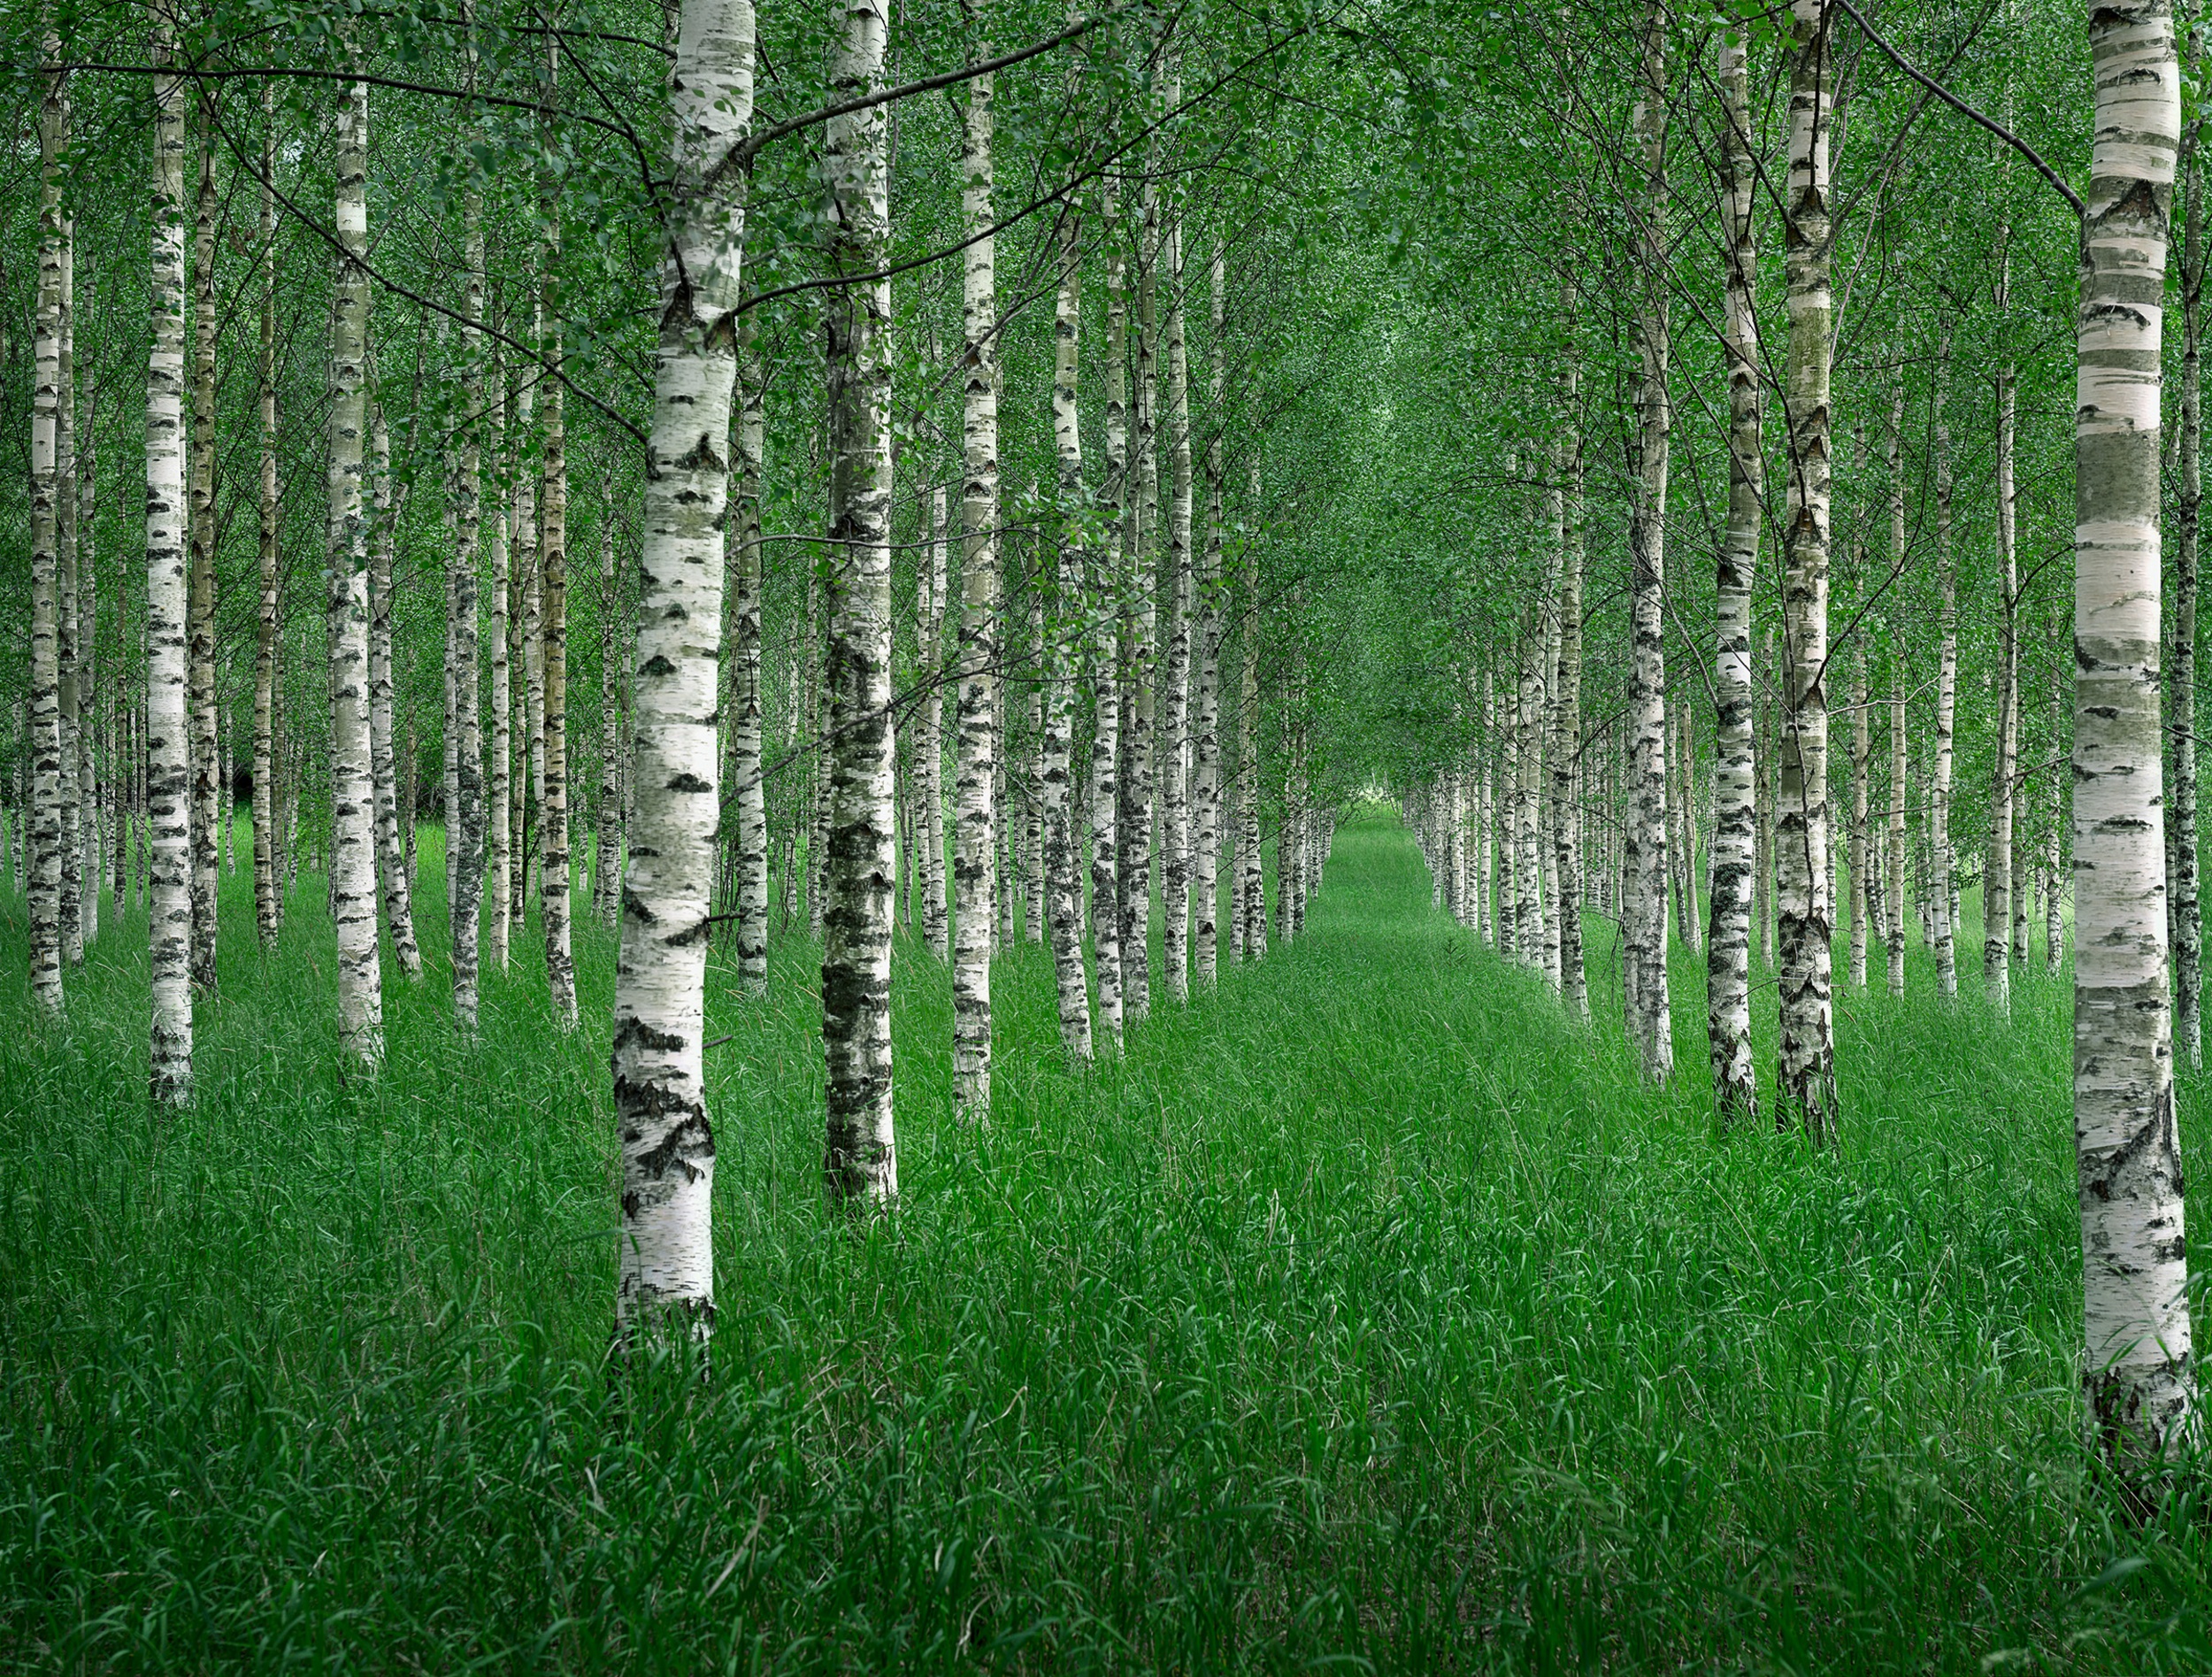 The grove of the dancing birches. Березовая роща. Березовая роща Тутаев. Берёзовая роща Шуя лето. Березовая роща Плес.